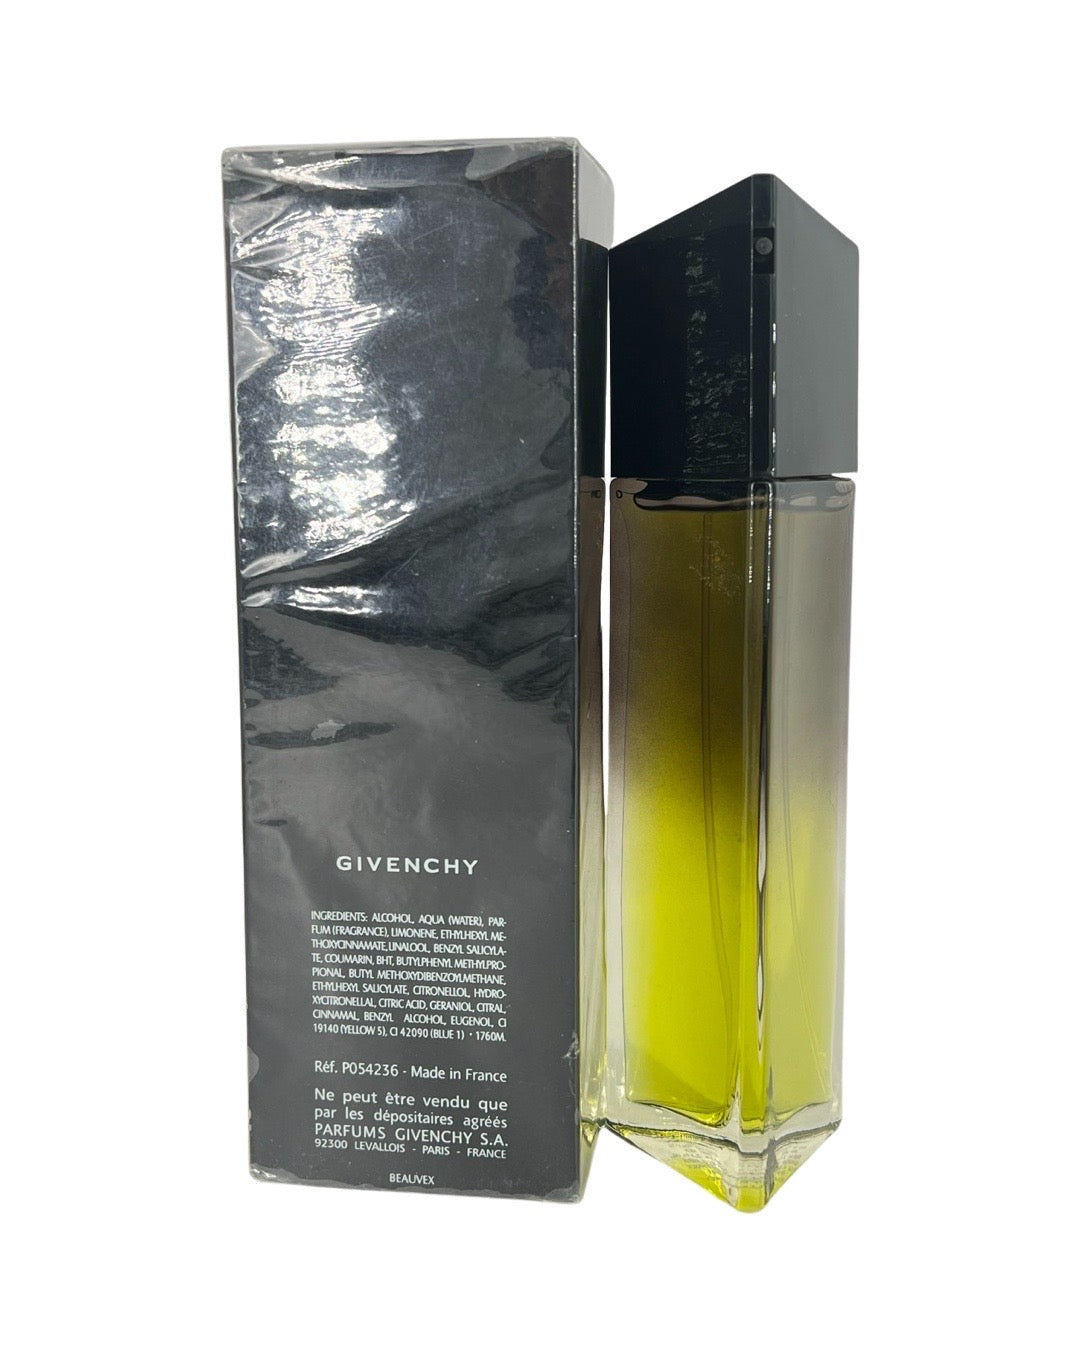 Very Irresistible by Givenchy for Men EDT Spray 3.4 Oz – FragranceOriginal